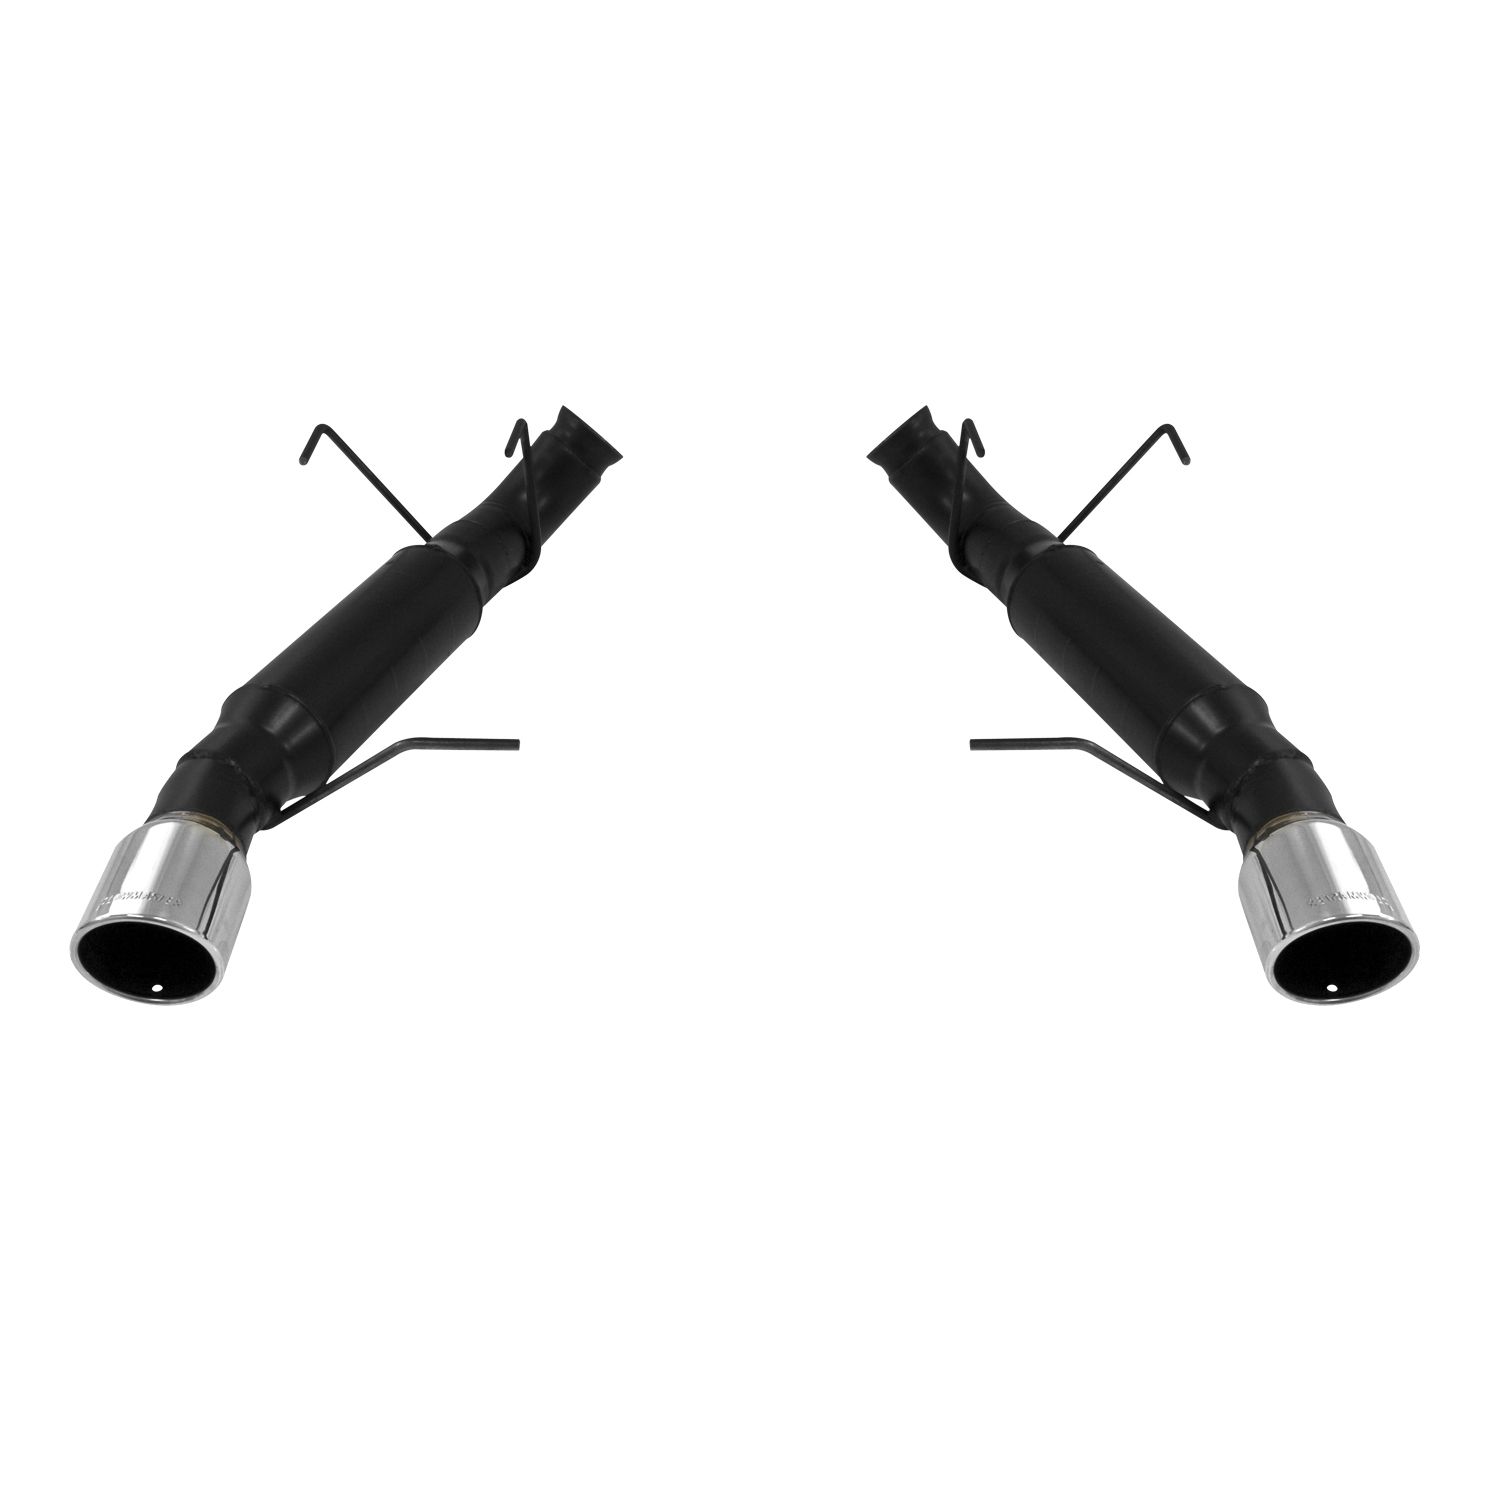 2013-2014 Ford Mustang GT 5.0L Flowmaster Outlaw Axle-Back Exhaust